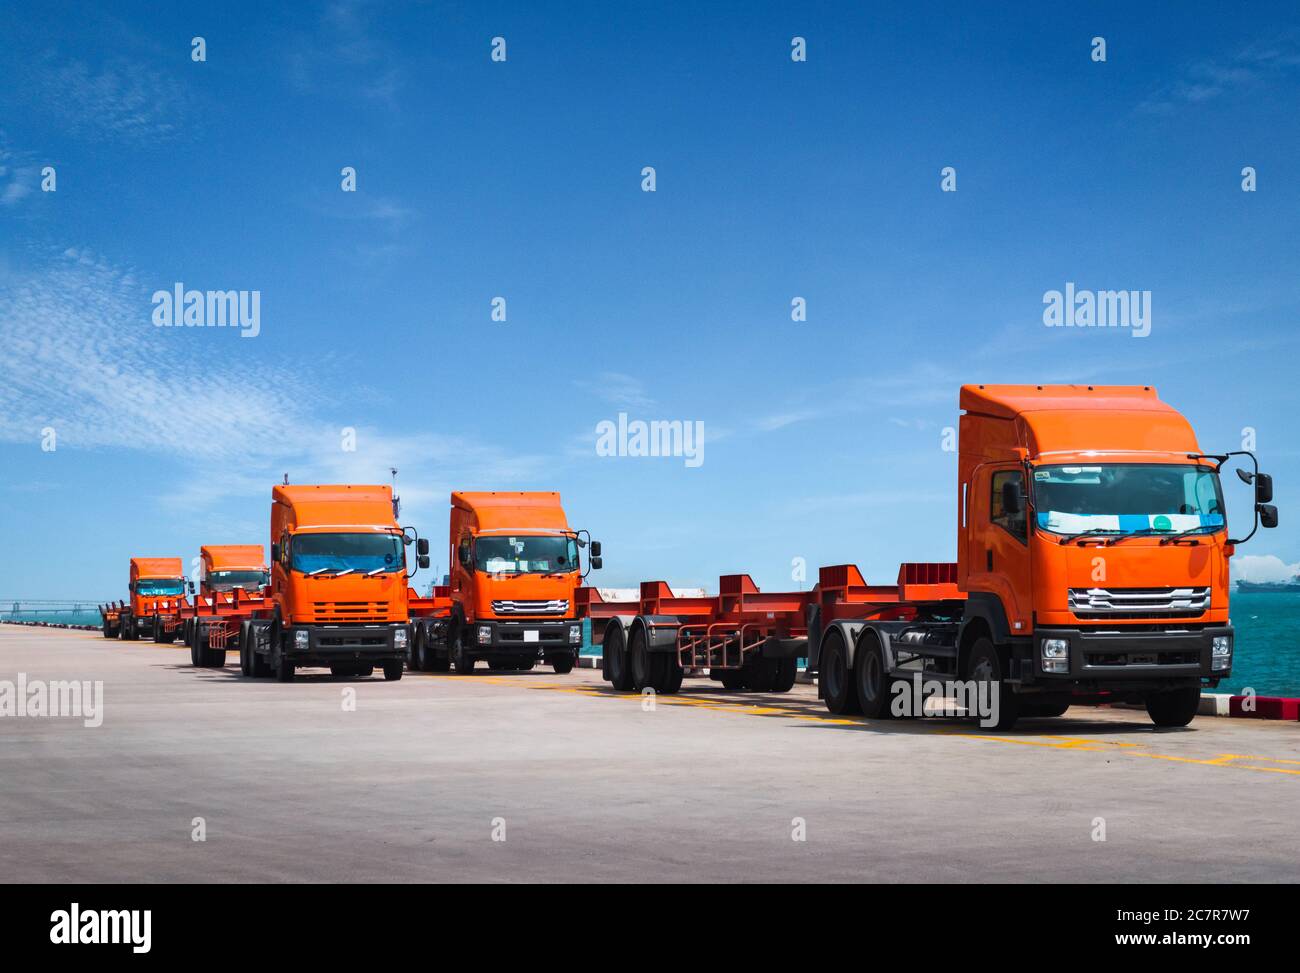 Fleet of trucks and trailer awaiting to pick containers on jetty harbor. Container transportation and logistics, trucking and delivery. Stock Photo